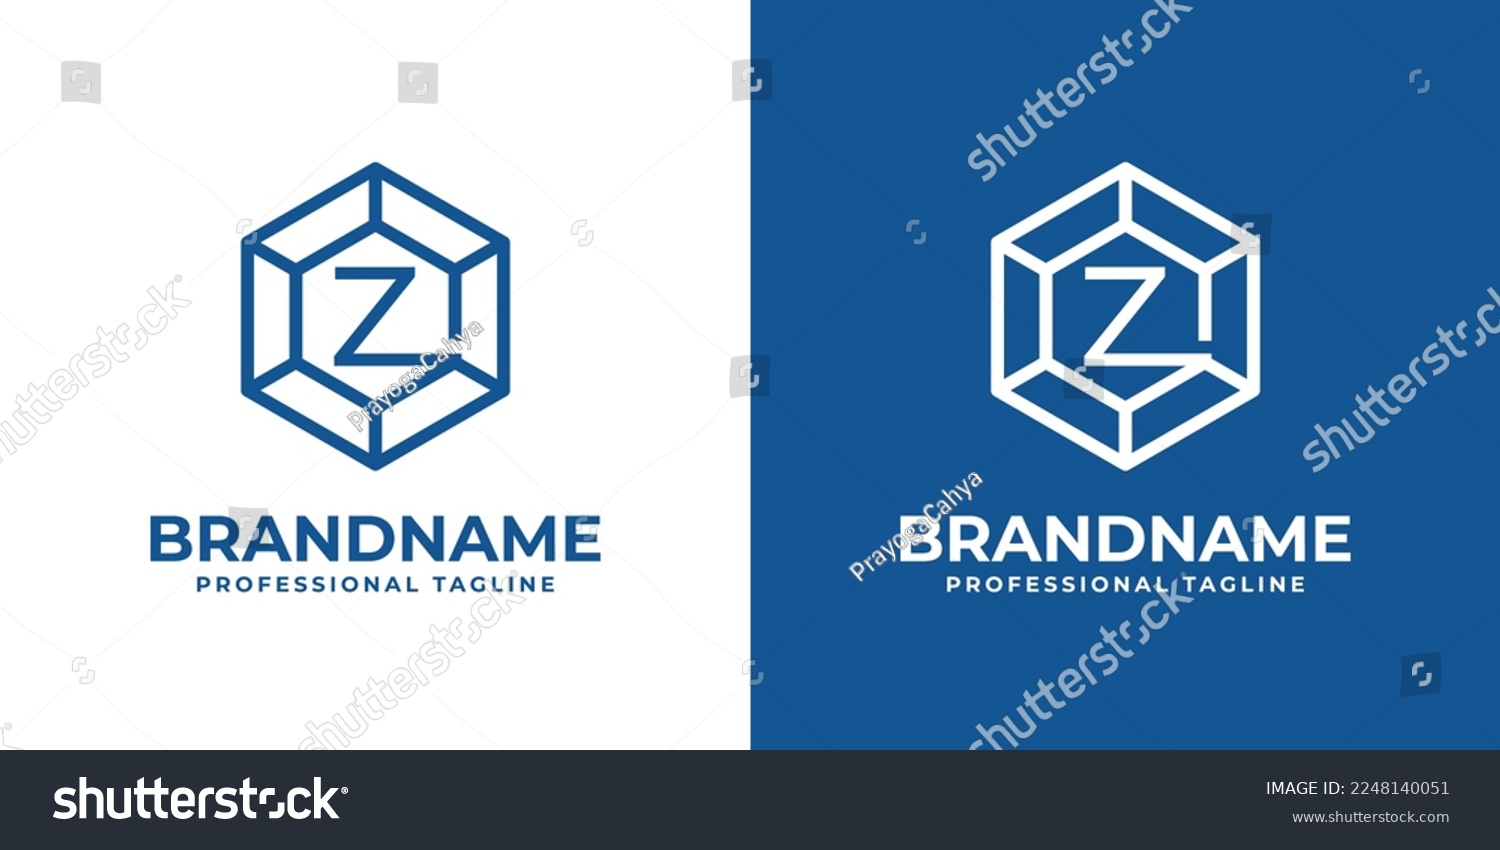 SVG of Initial Z Hexagon Diamond Logo, suitable for any business with Z initial. svg